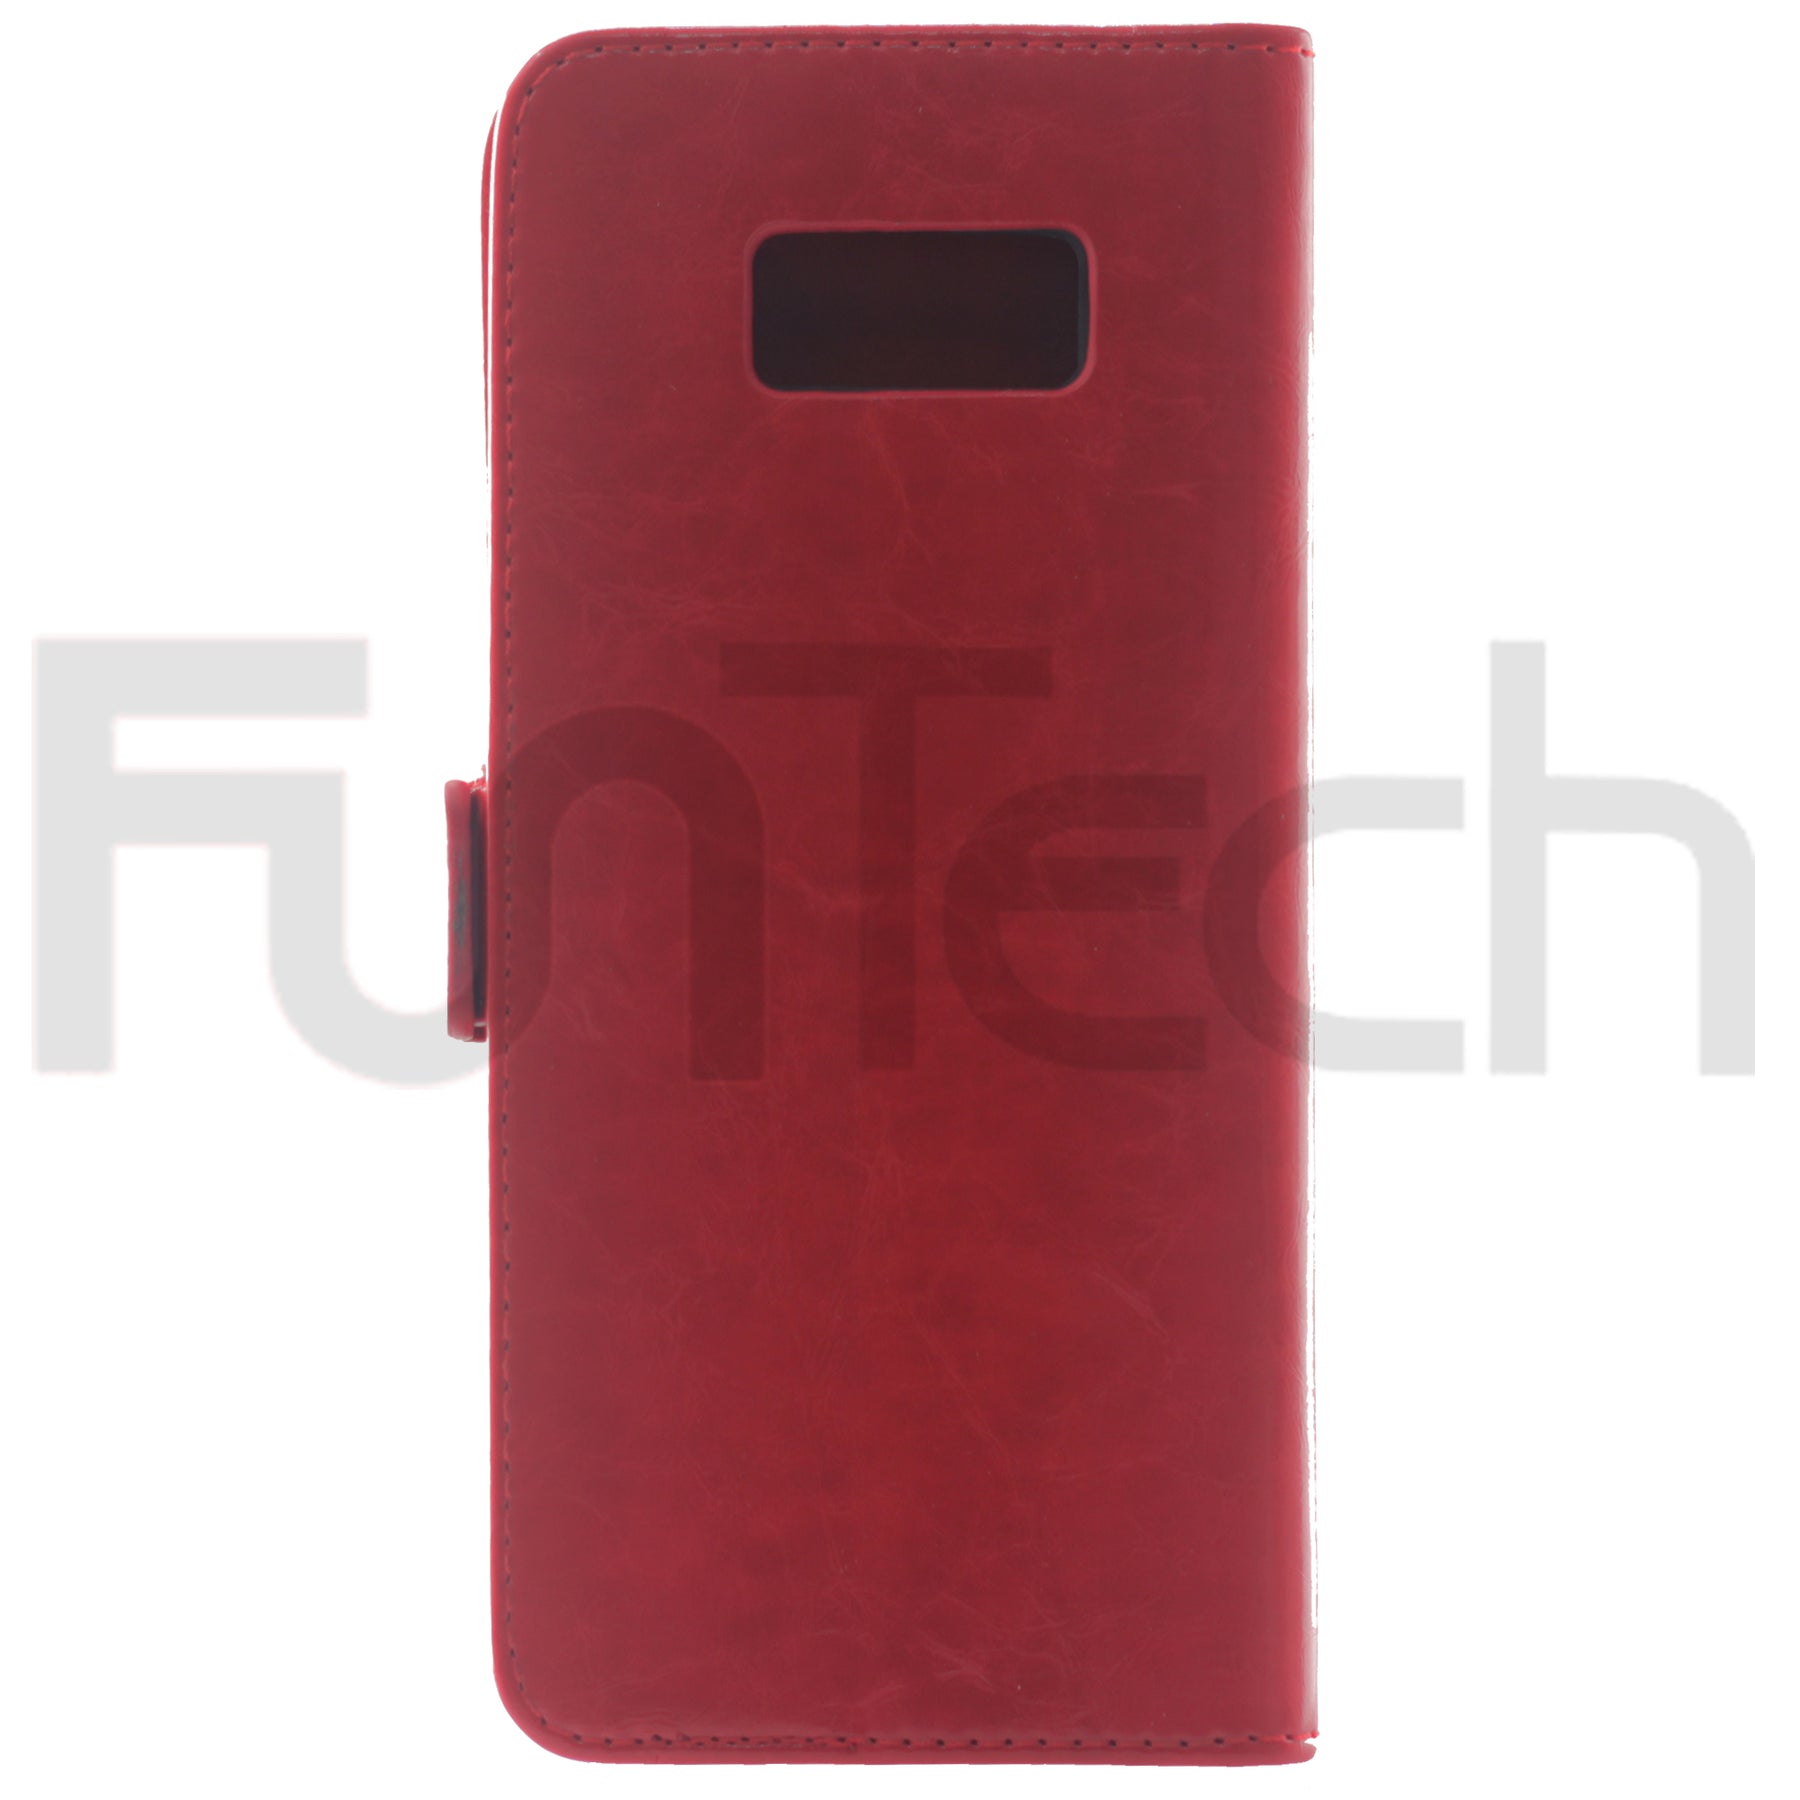 Samsung S8+, Leather Wallet Case, Color Red.